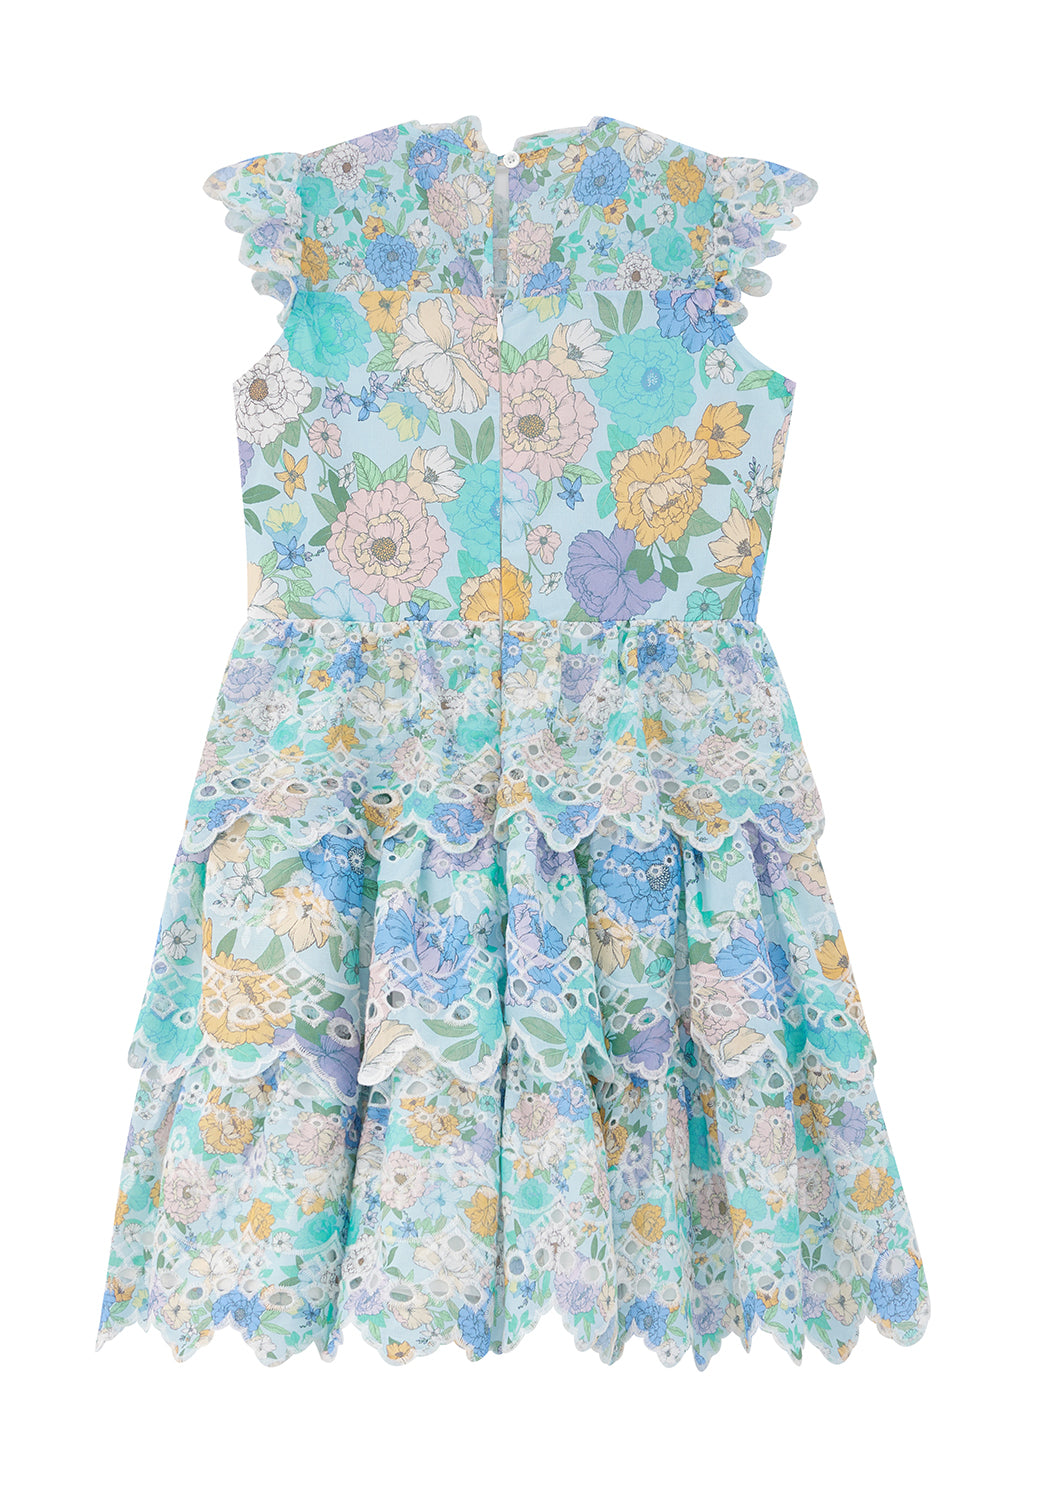 Dress Floral Azure Embroidered Frilly